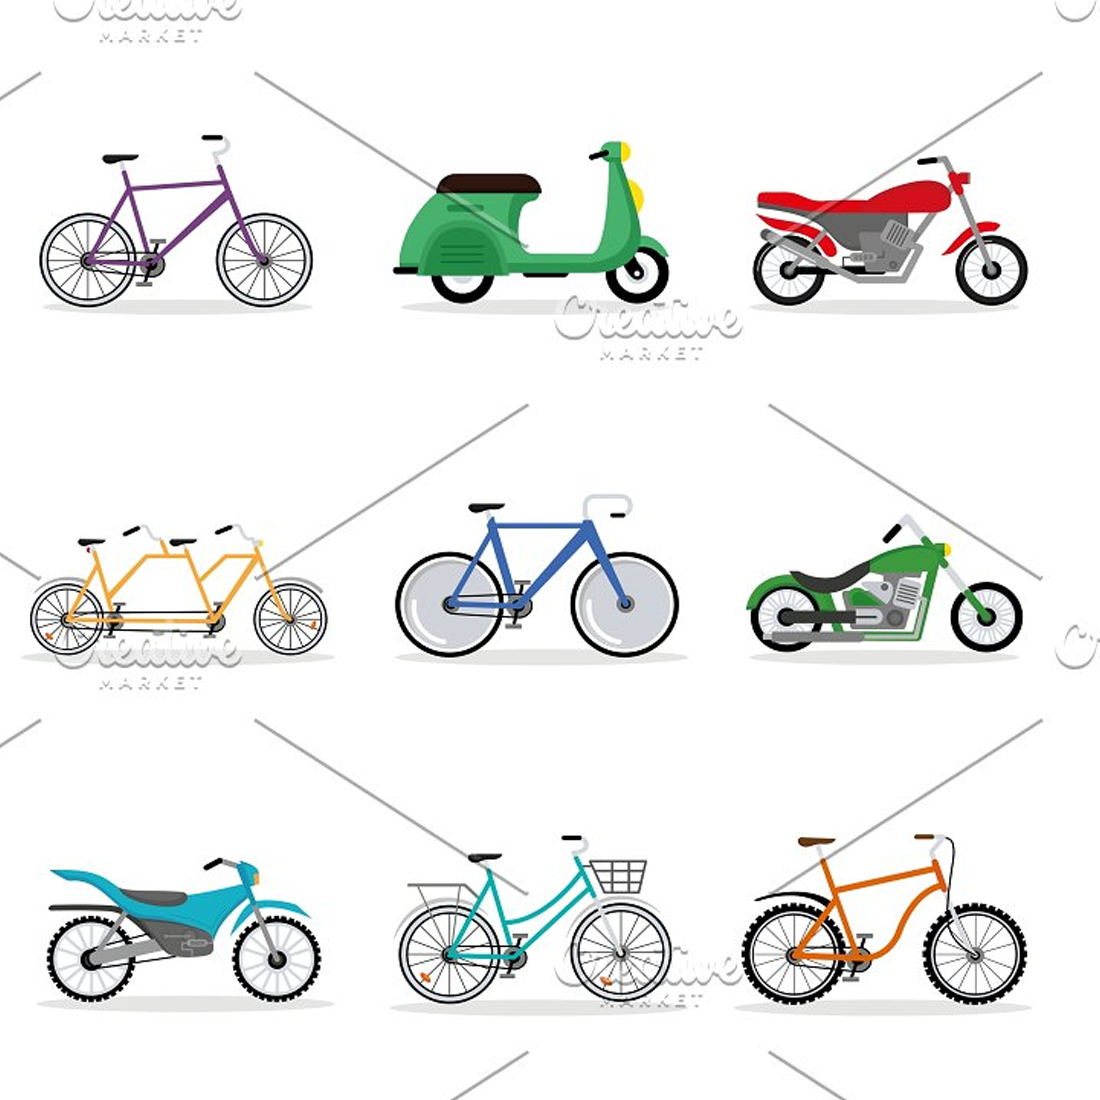 Nine bikes and motorcycles vehicles.